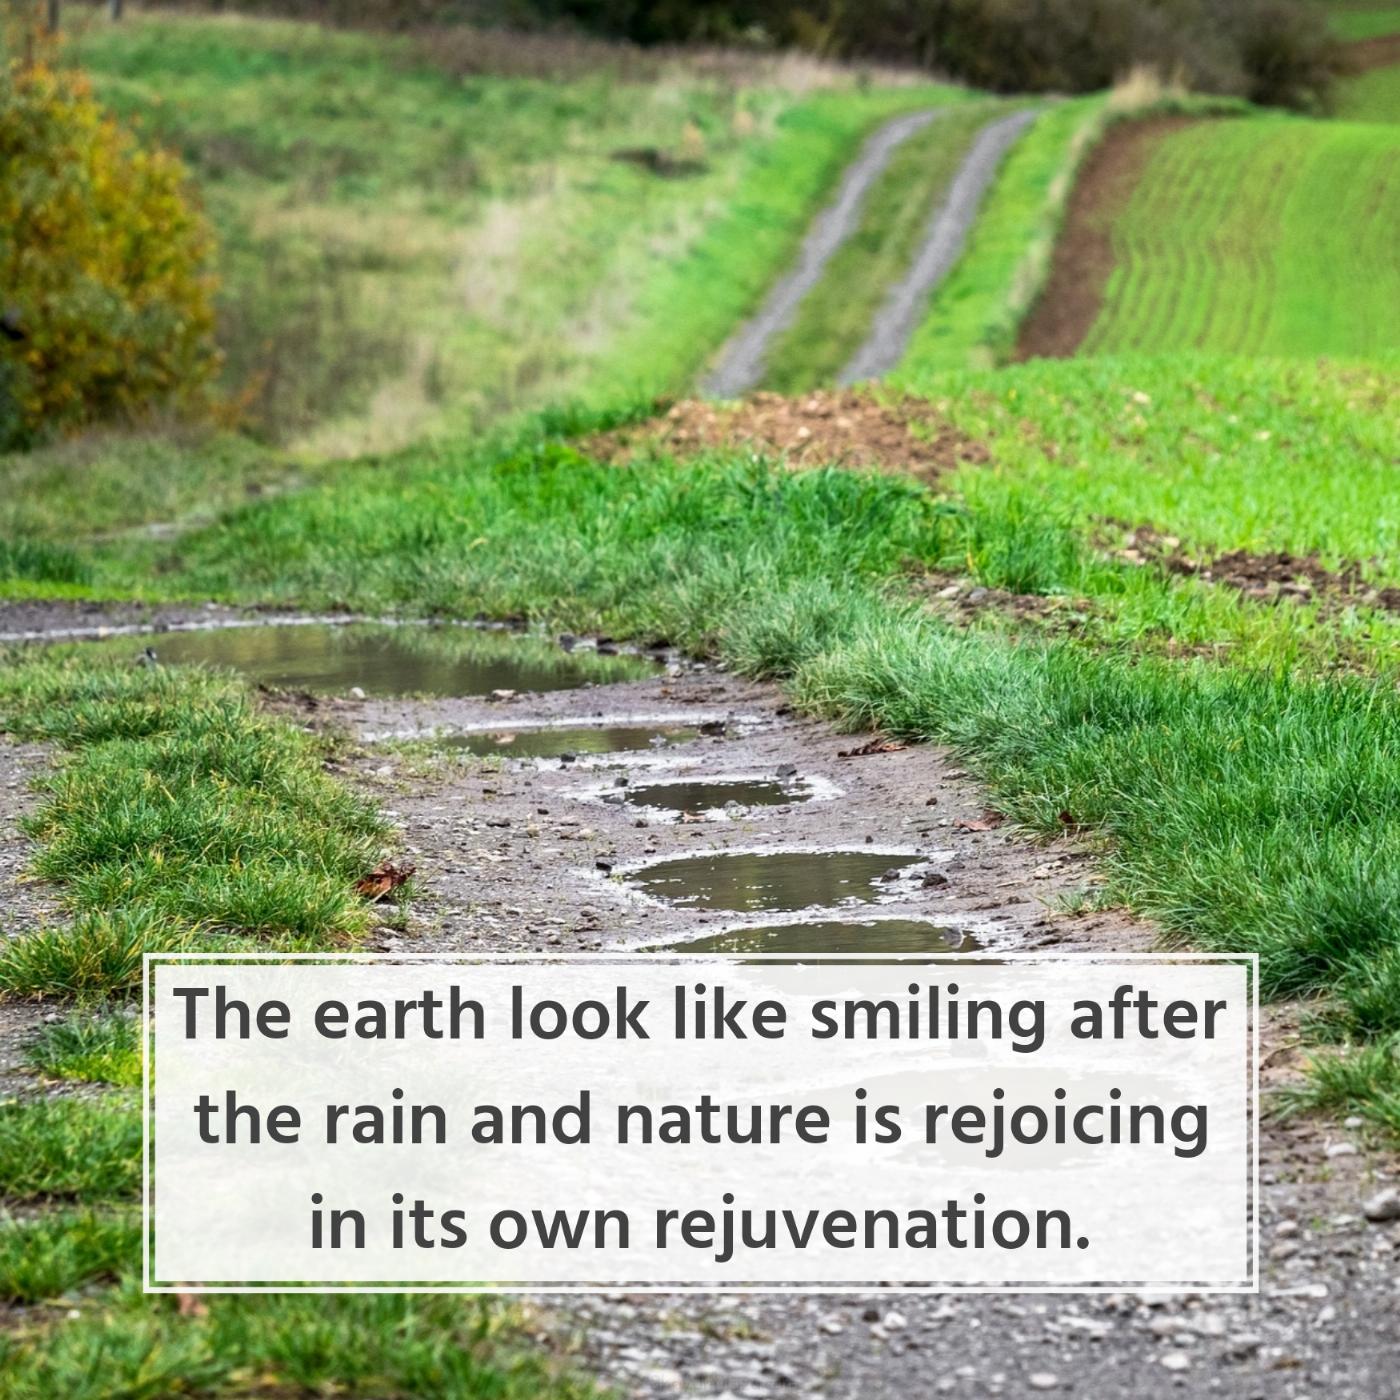 The earth look like smiling after the rain and nature is rejoicing